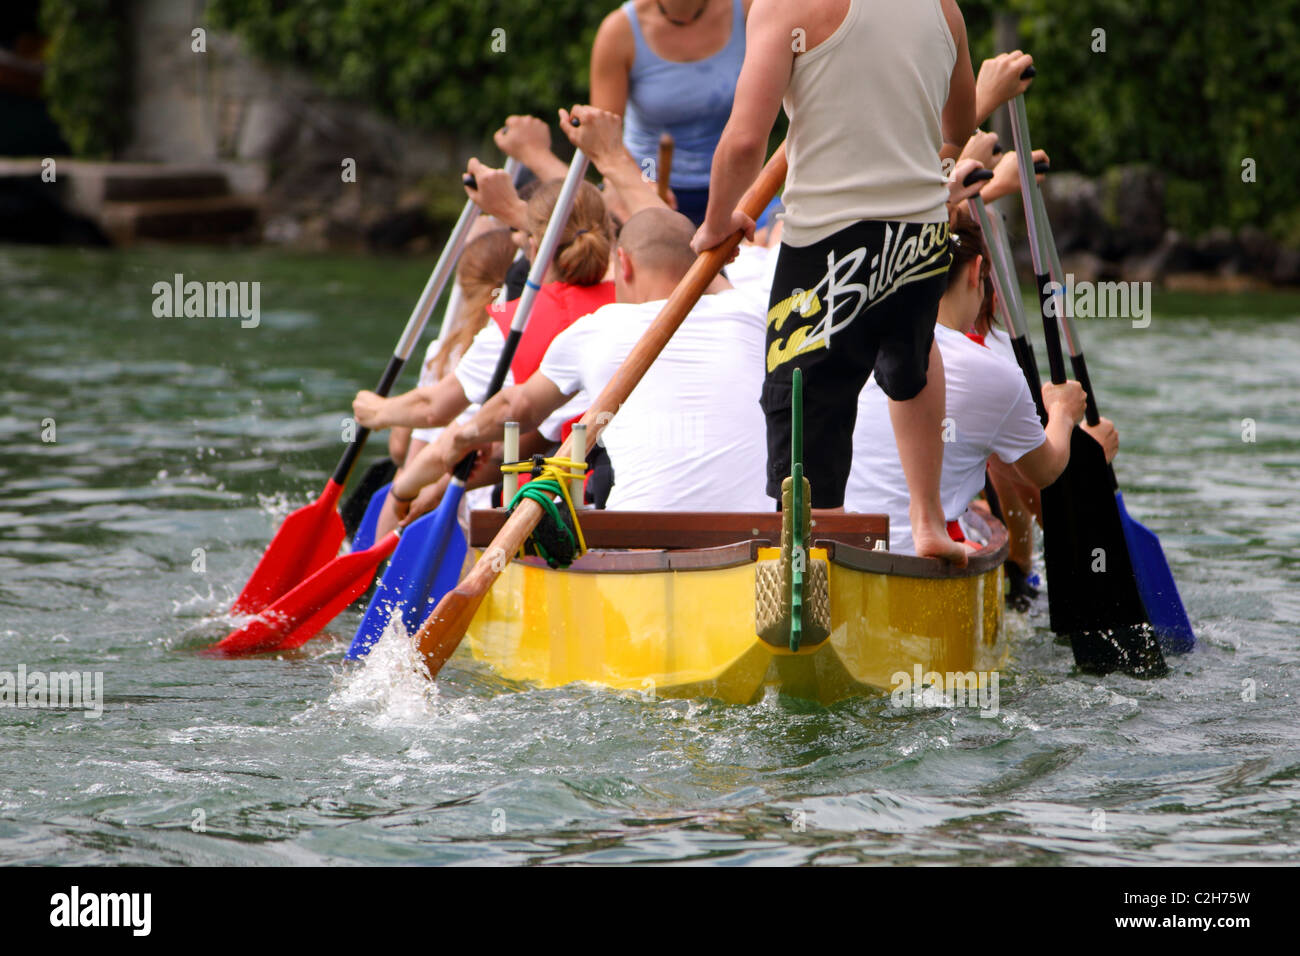 Athletes fought hard for victory and had fun at the dragen boat racing festival June 12, 2010 in Meilen, Switzerland. Stock Photo